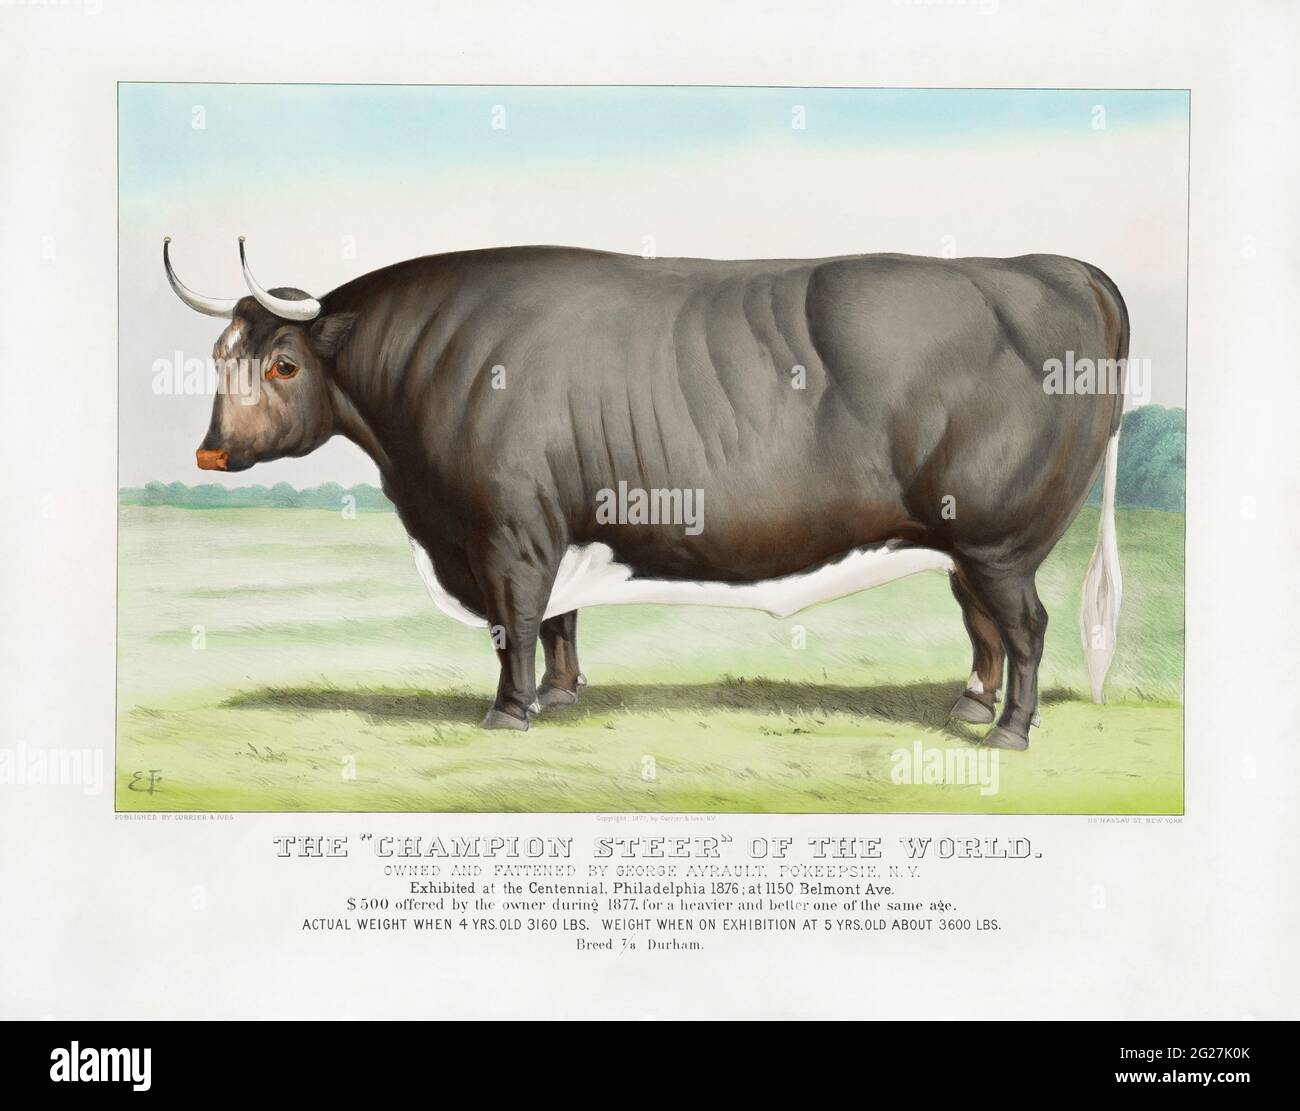 19th century U.S. agricultural print of a champion-size cattle. Stock Photo